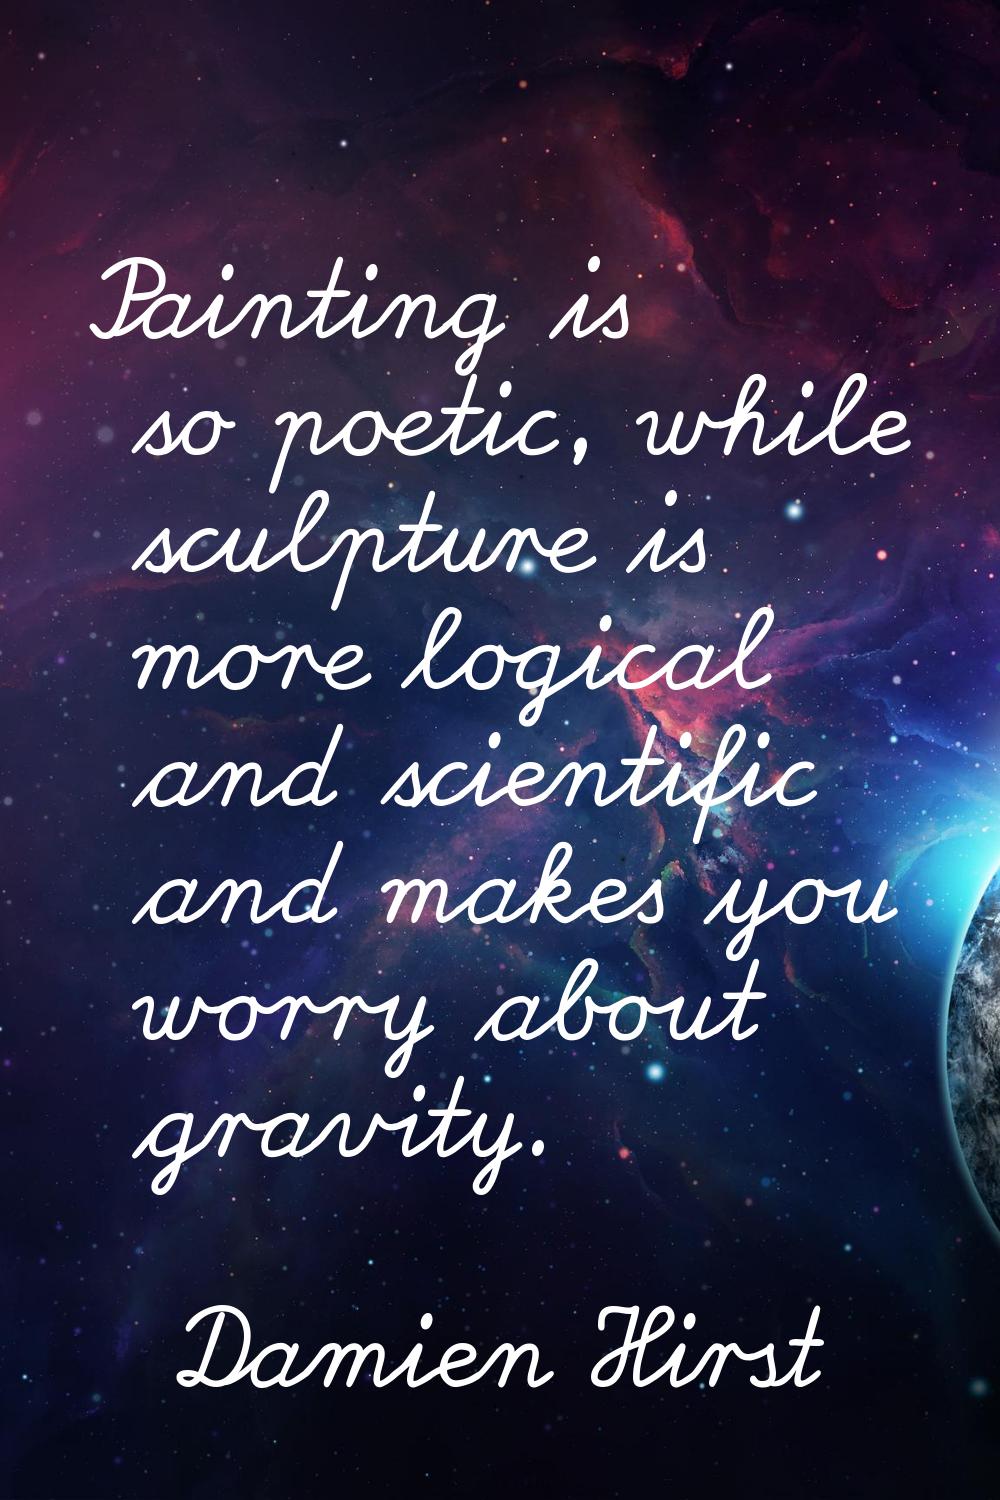 Painting is so poetic, while sculpture is more logical and scientific and makes you worry about gra